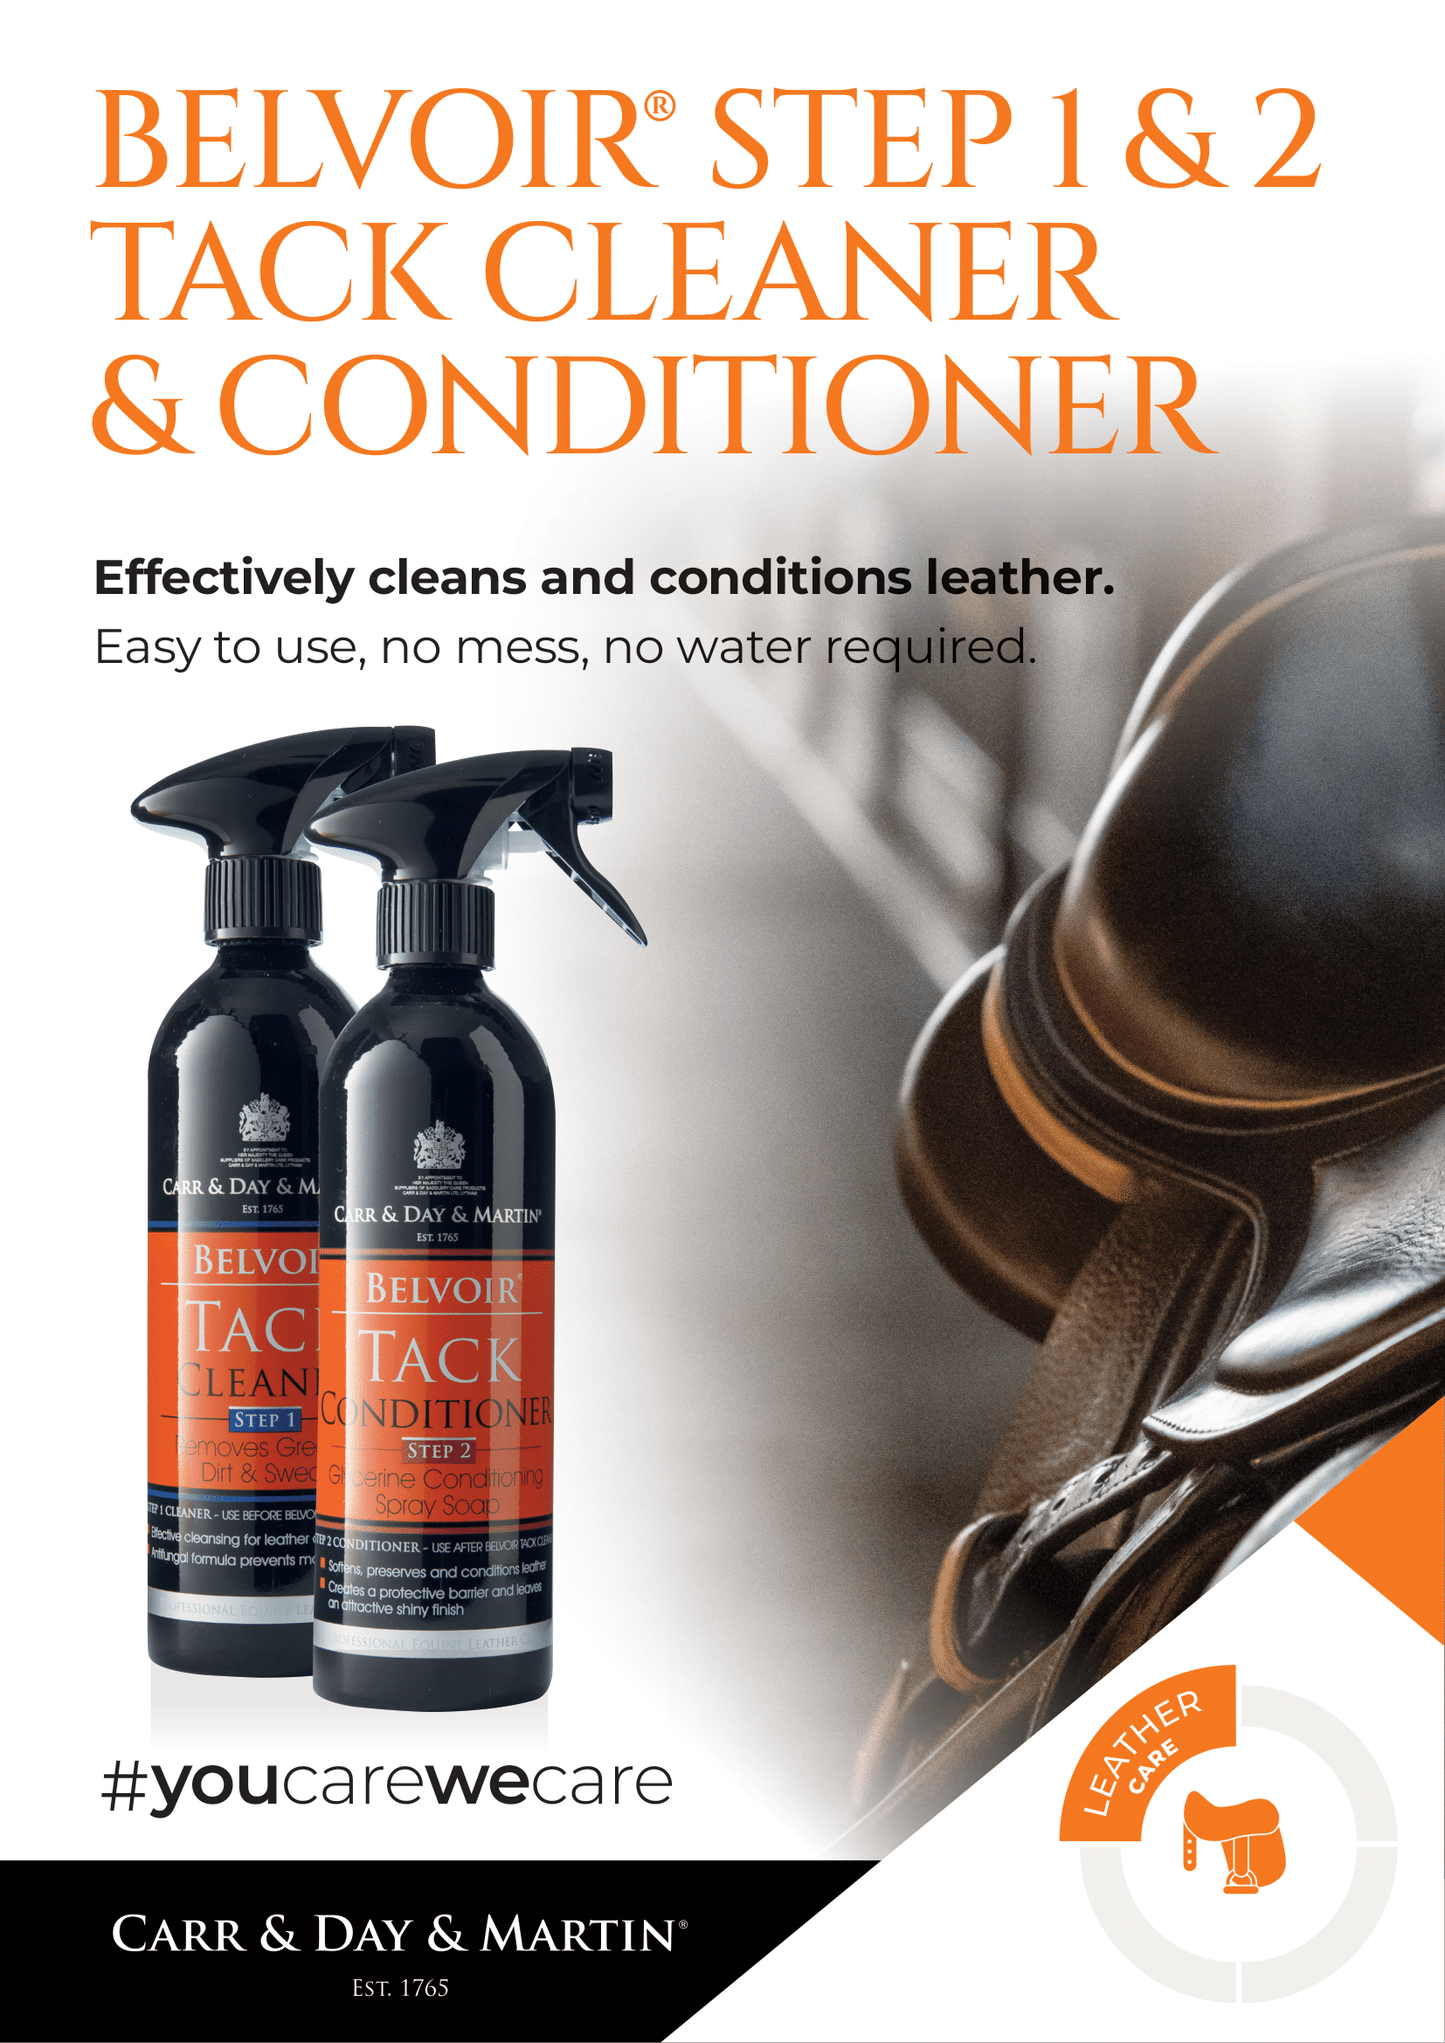 Belvoir Leather Tack Conditioner - Step 2